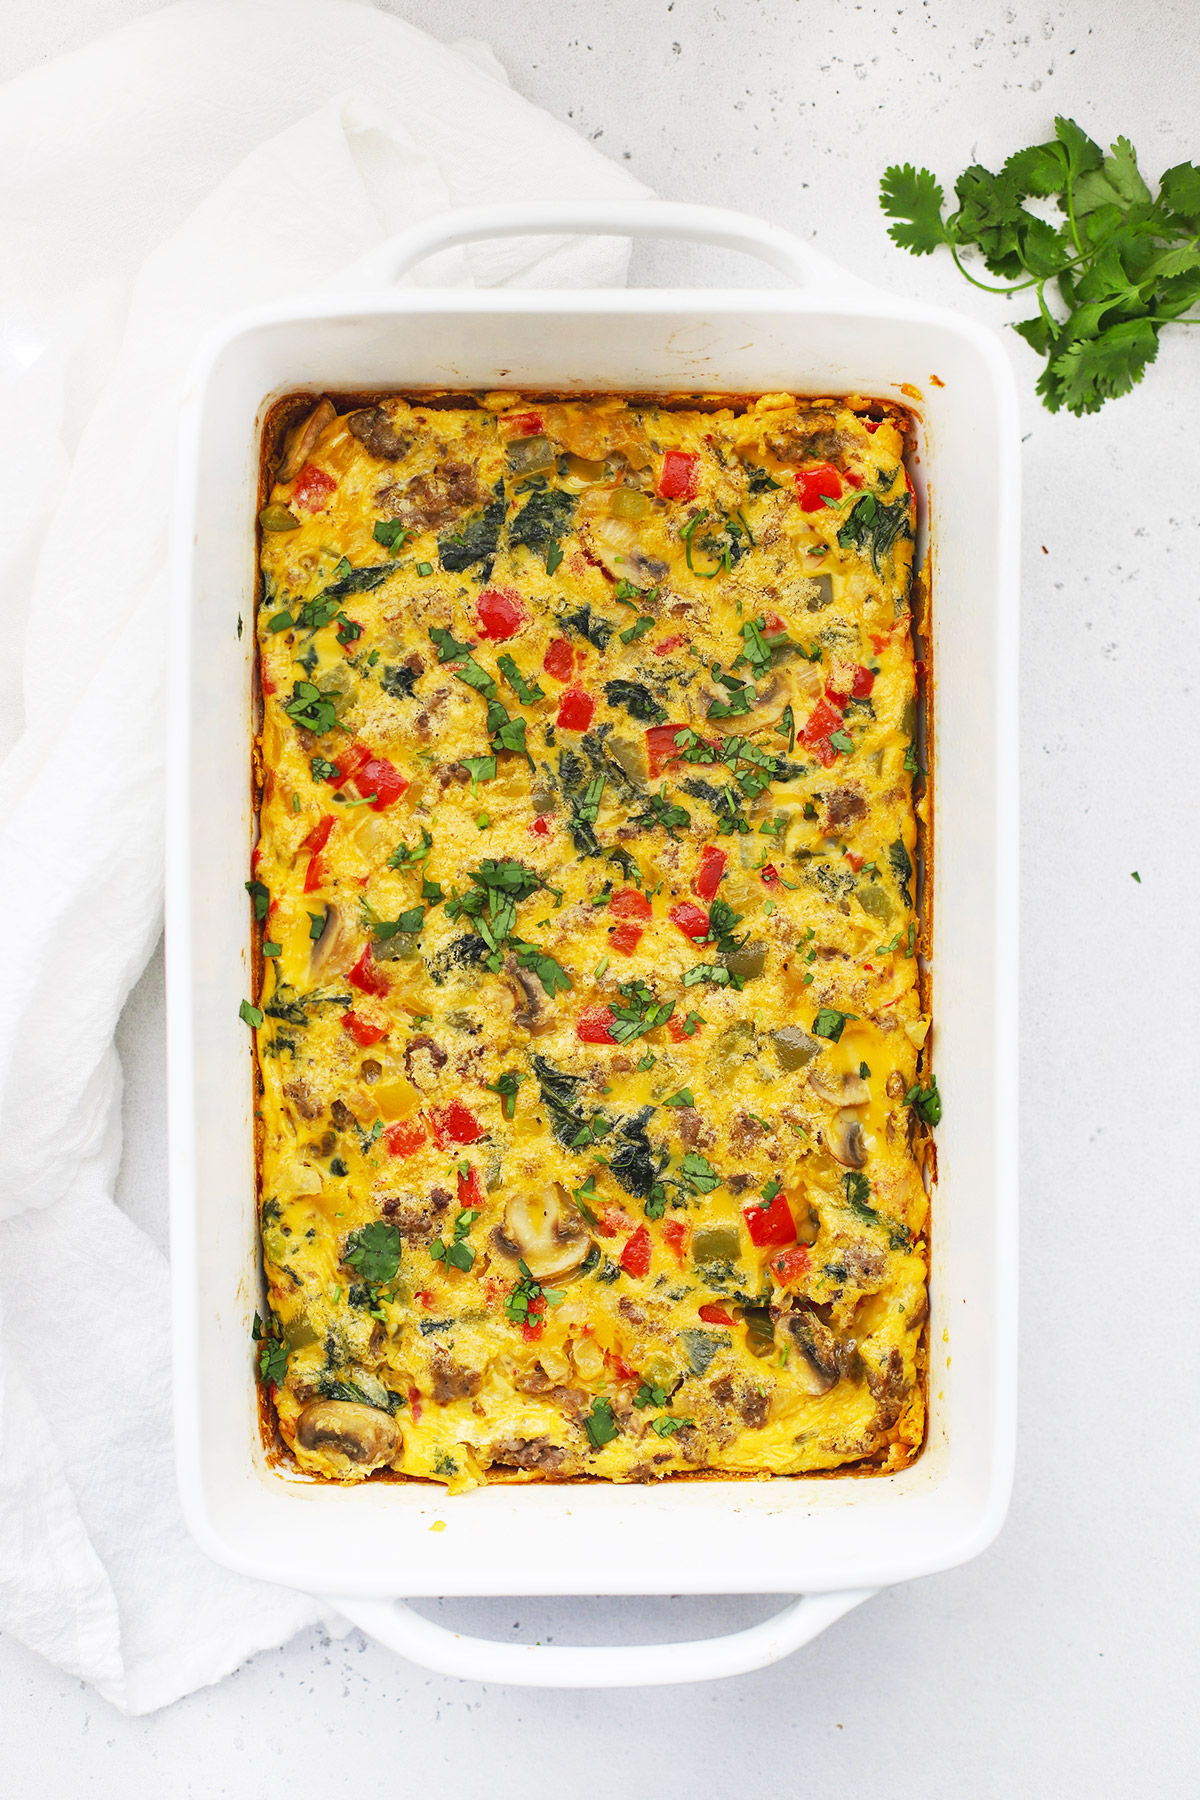 Overhead view of sausage and veggie breakfast casserole in a white baking dish